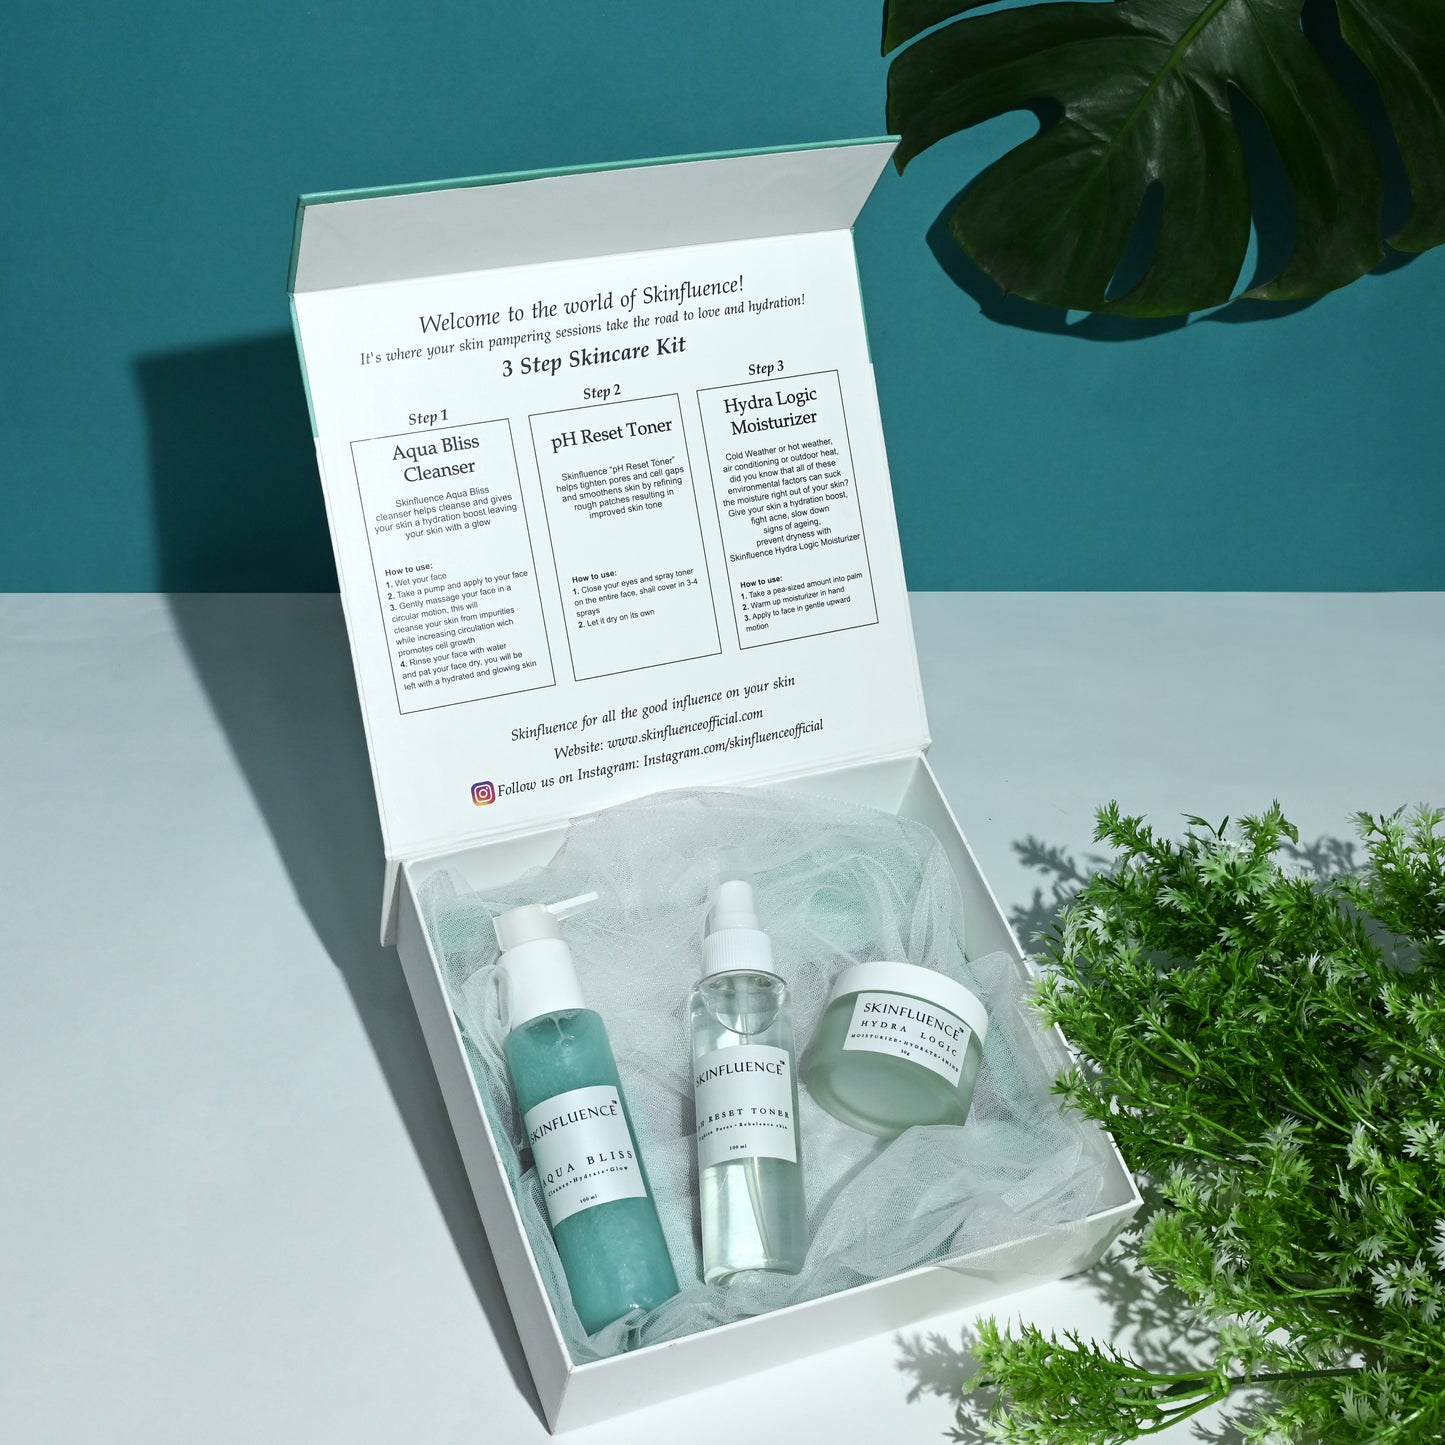 The Essential 3 Step Skin Care Kit for Clear and Radiant Skin | Cleanser, Toner & Moisturizer